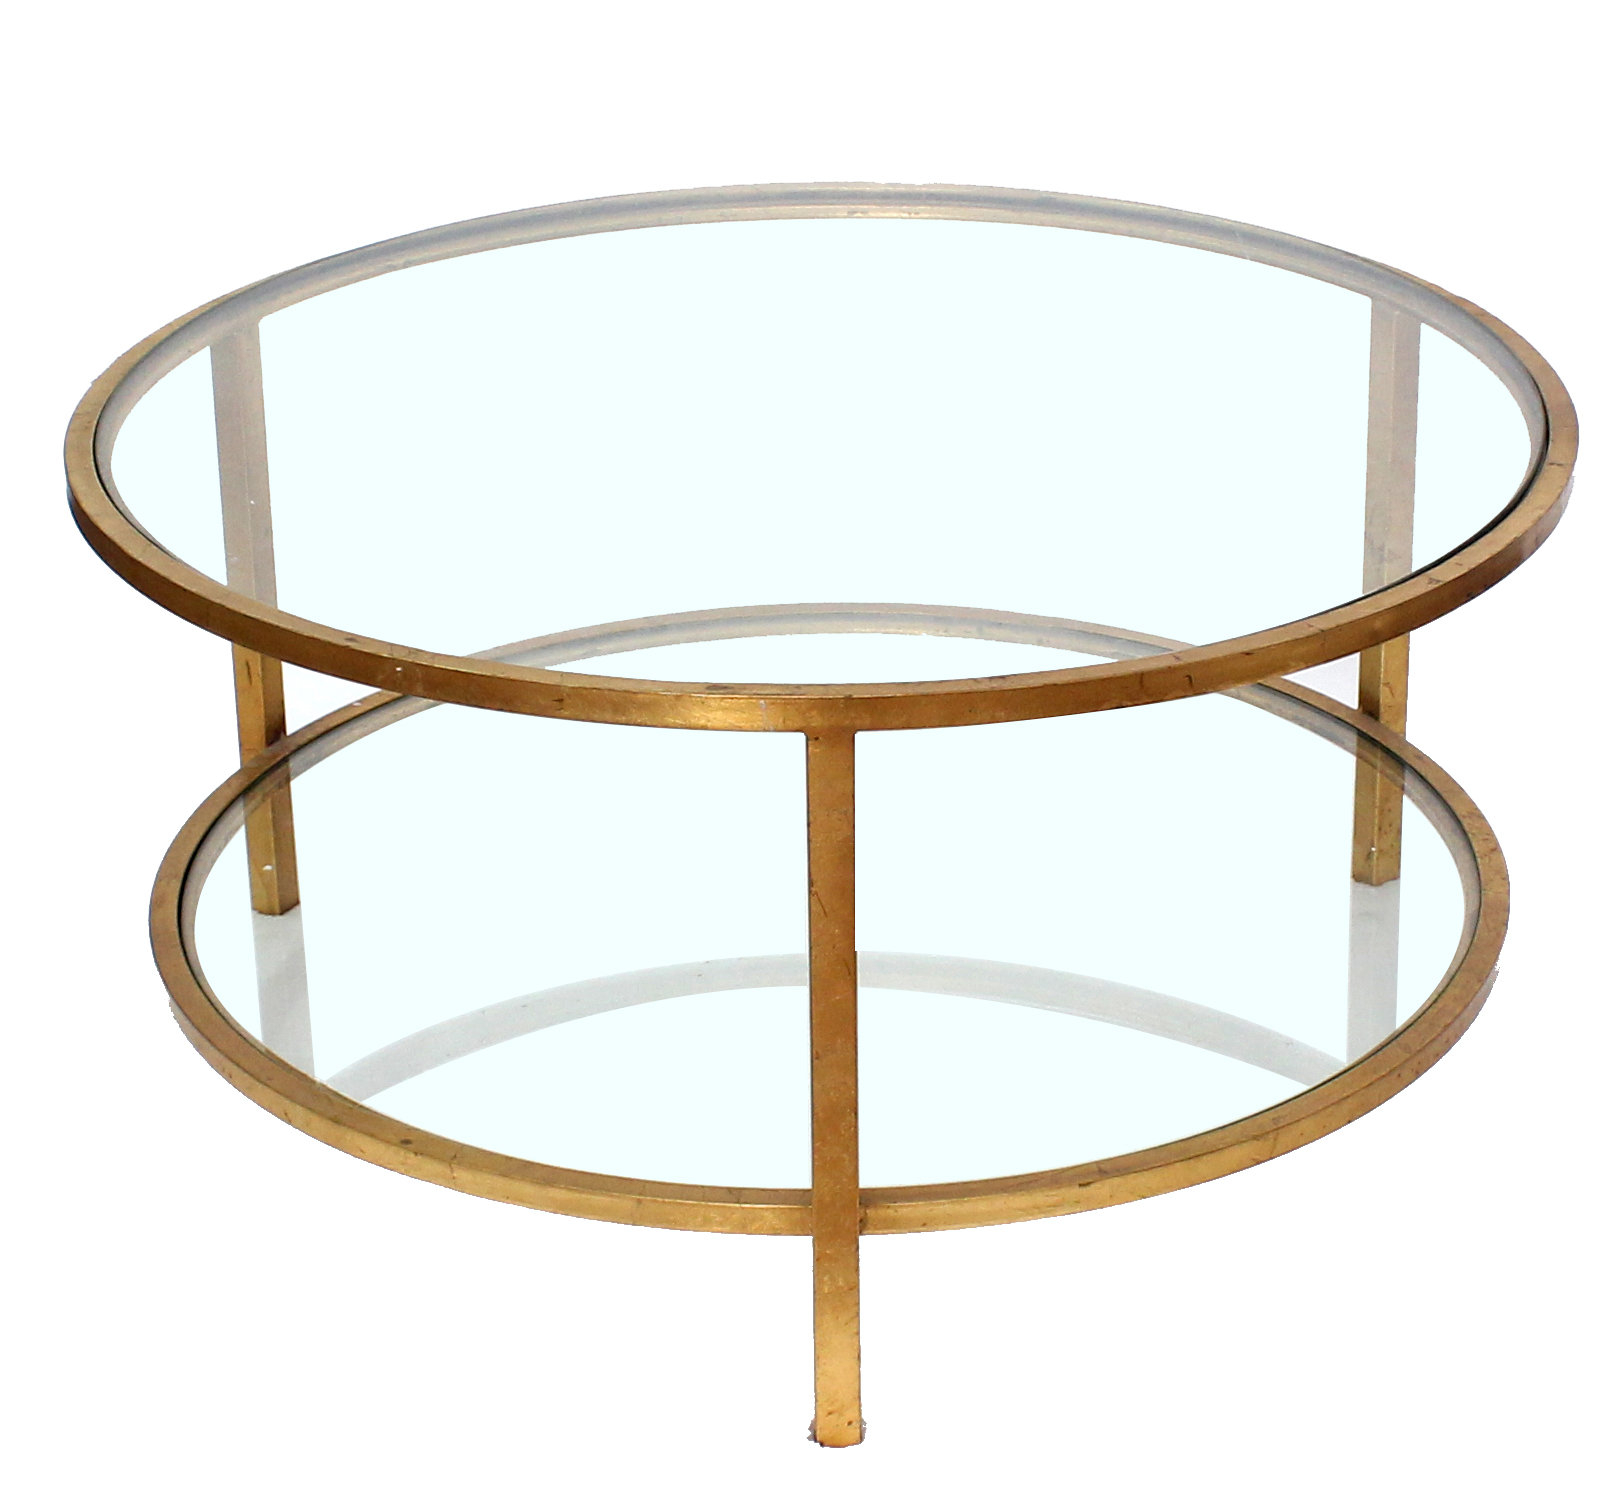 Everly Quinn Foxborough Double Layered Coffee Table Wayfair with regard to measurements 1601 X 1509